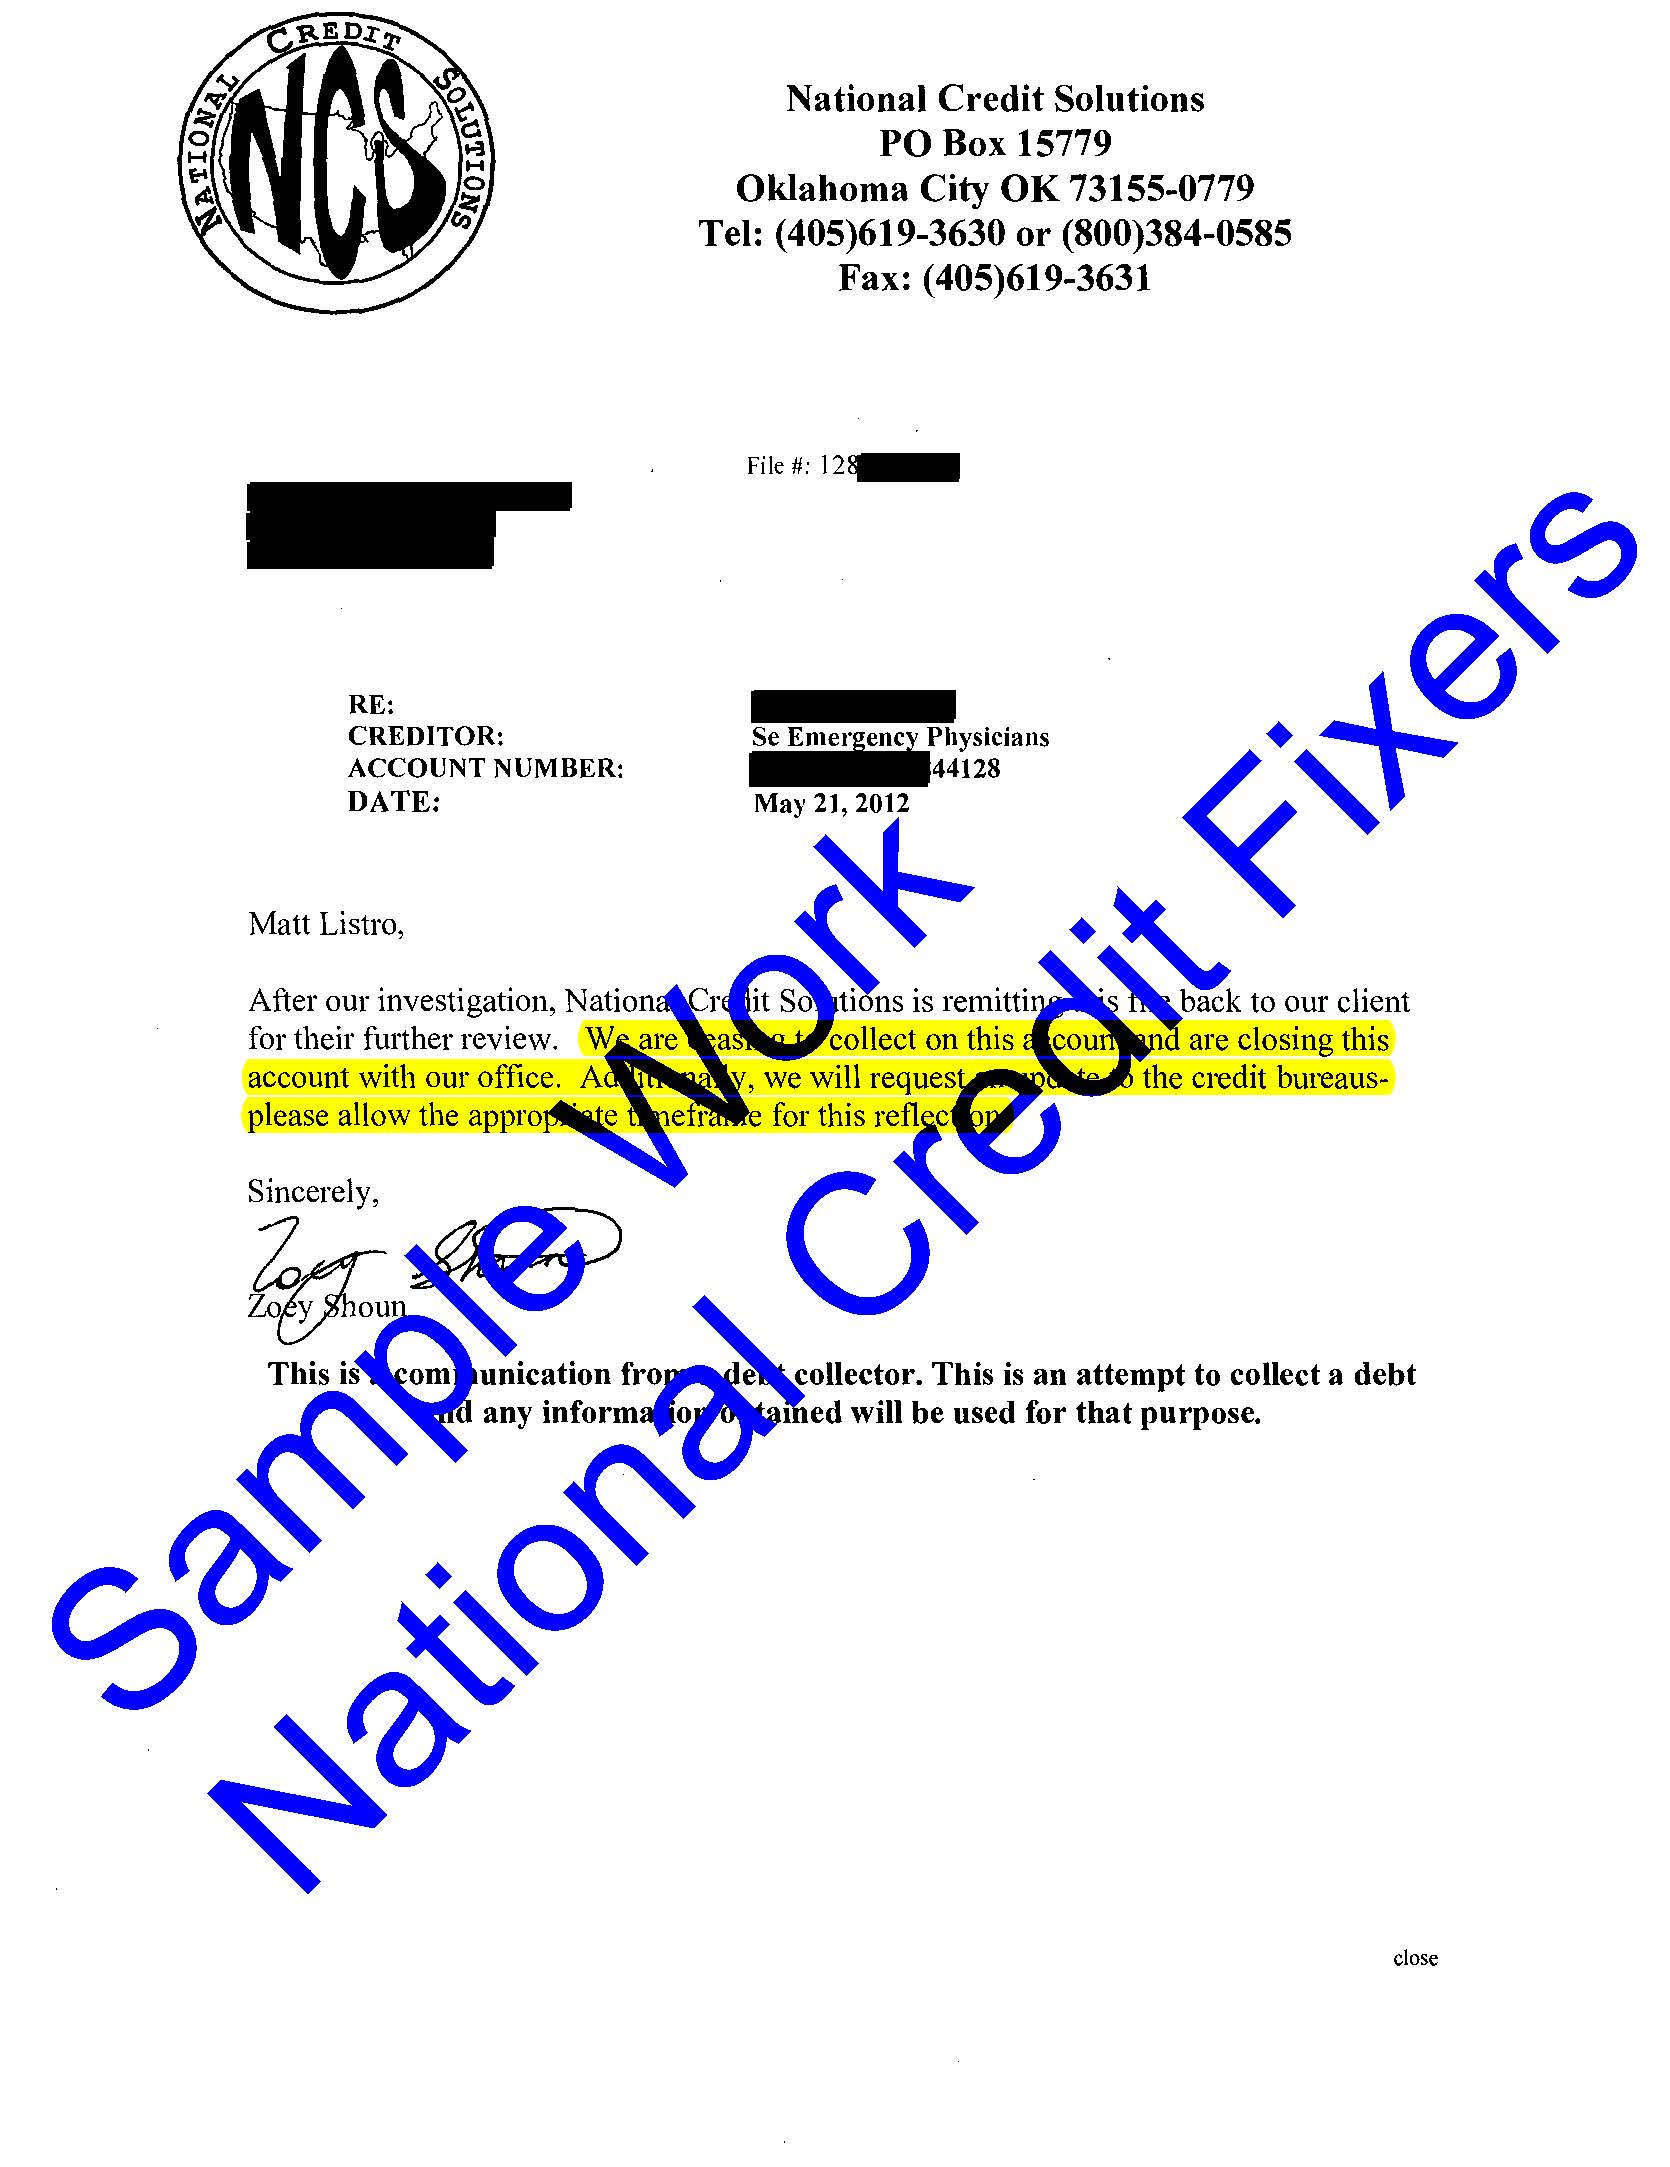 National Credit Solutions Deletion